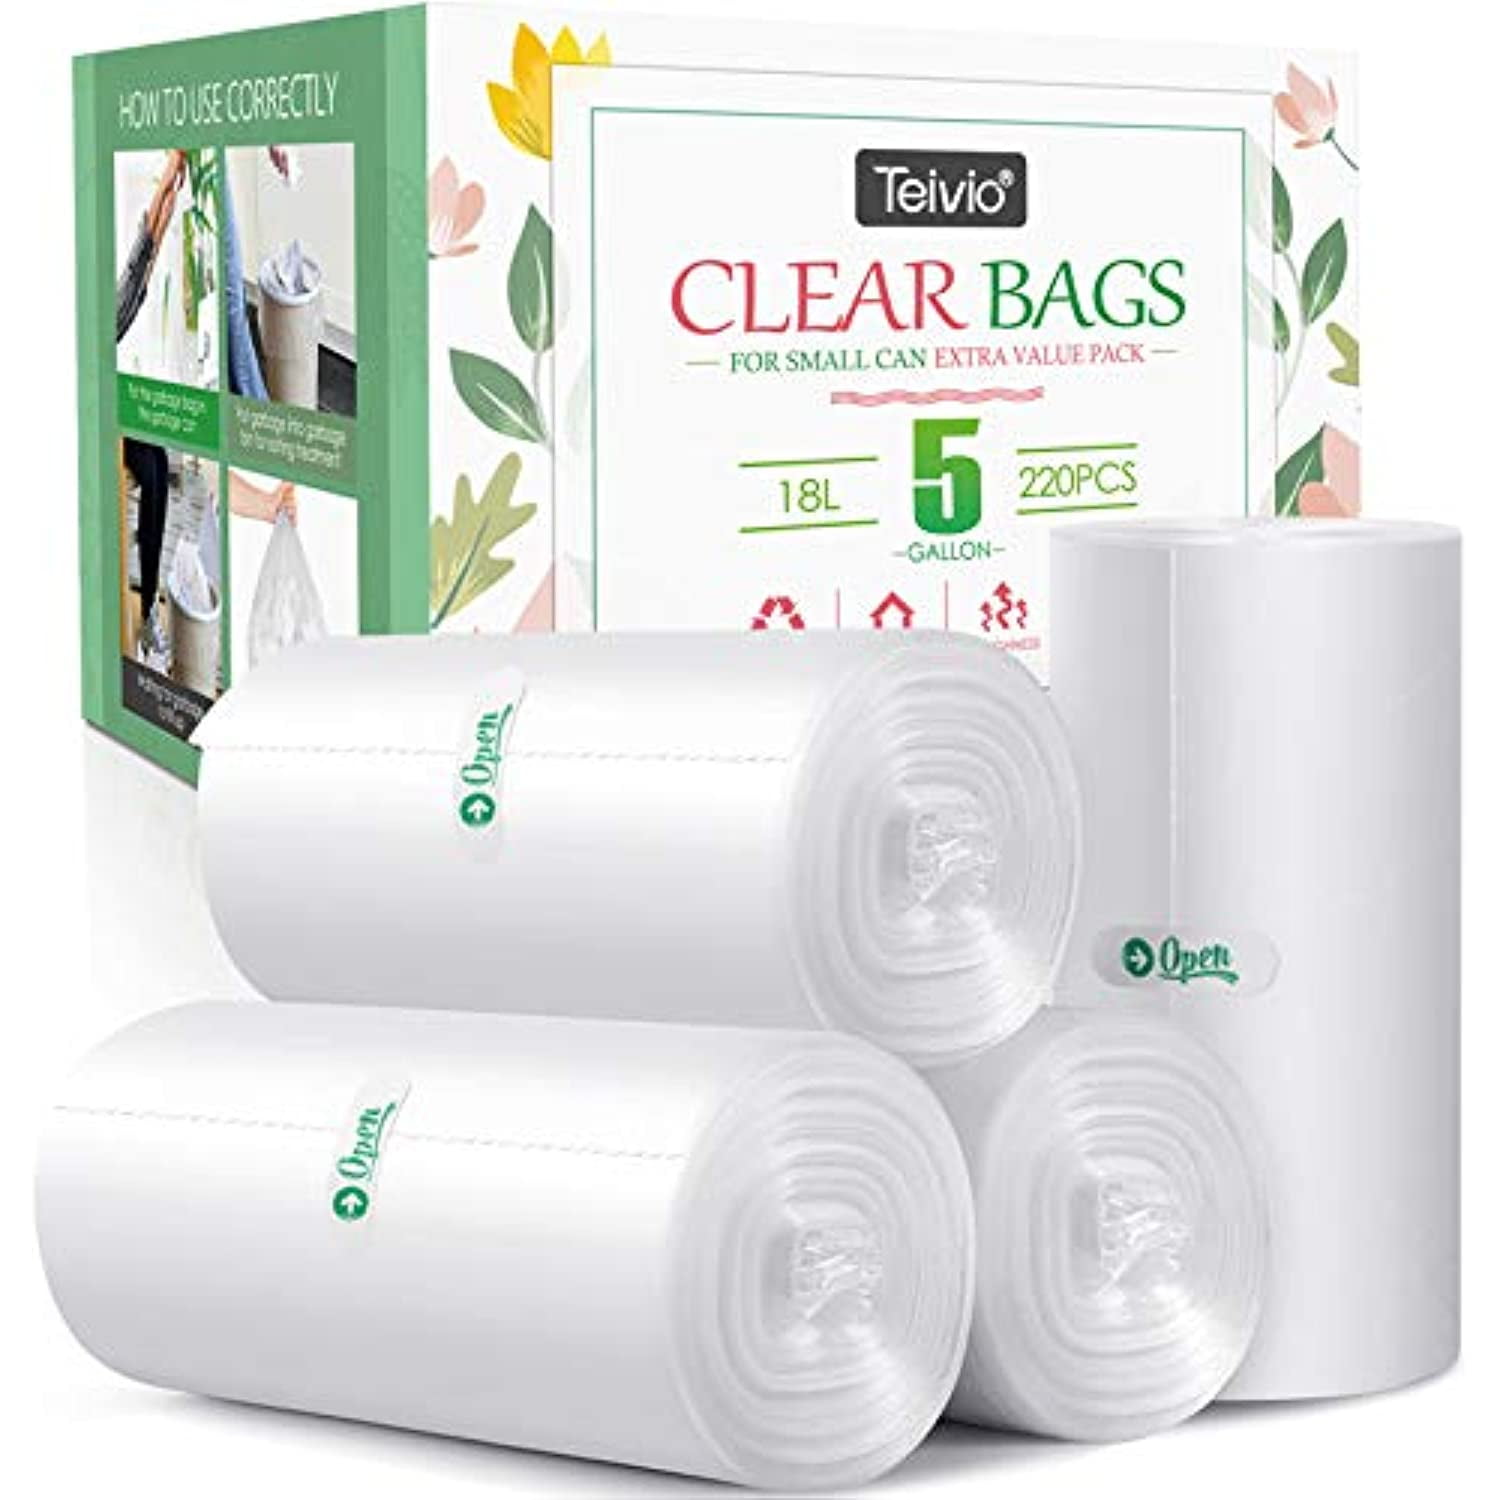 OKKEAI 4-5 Gallon Trash Bags Small Garbage Bags Bathroom Trash Can Bags 15L  Bin Liner for Office Kitchen,White,150 Counts,Fits 15-20 Liter Bins